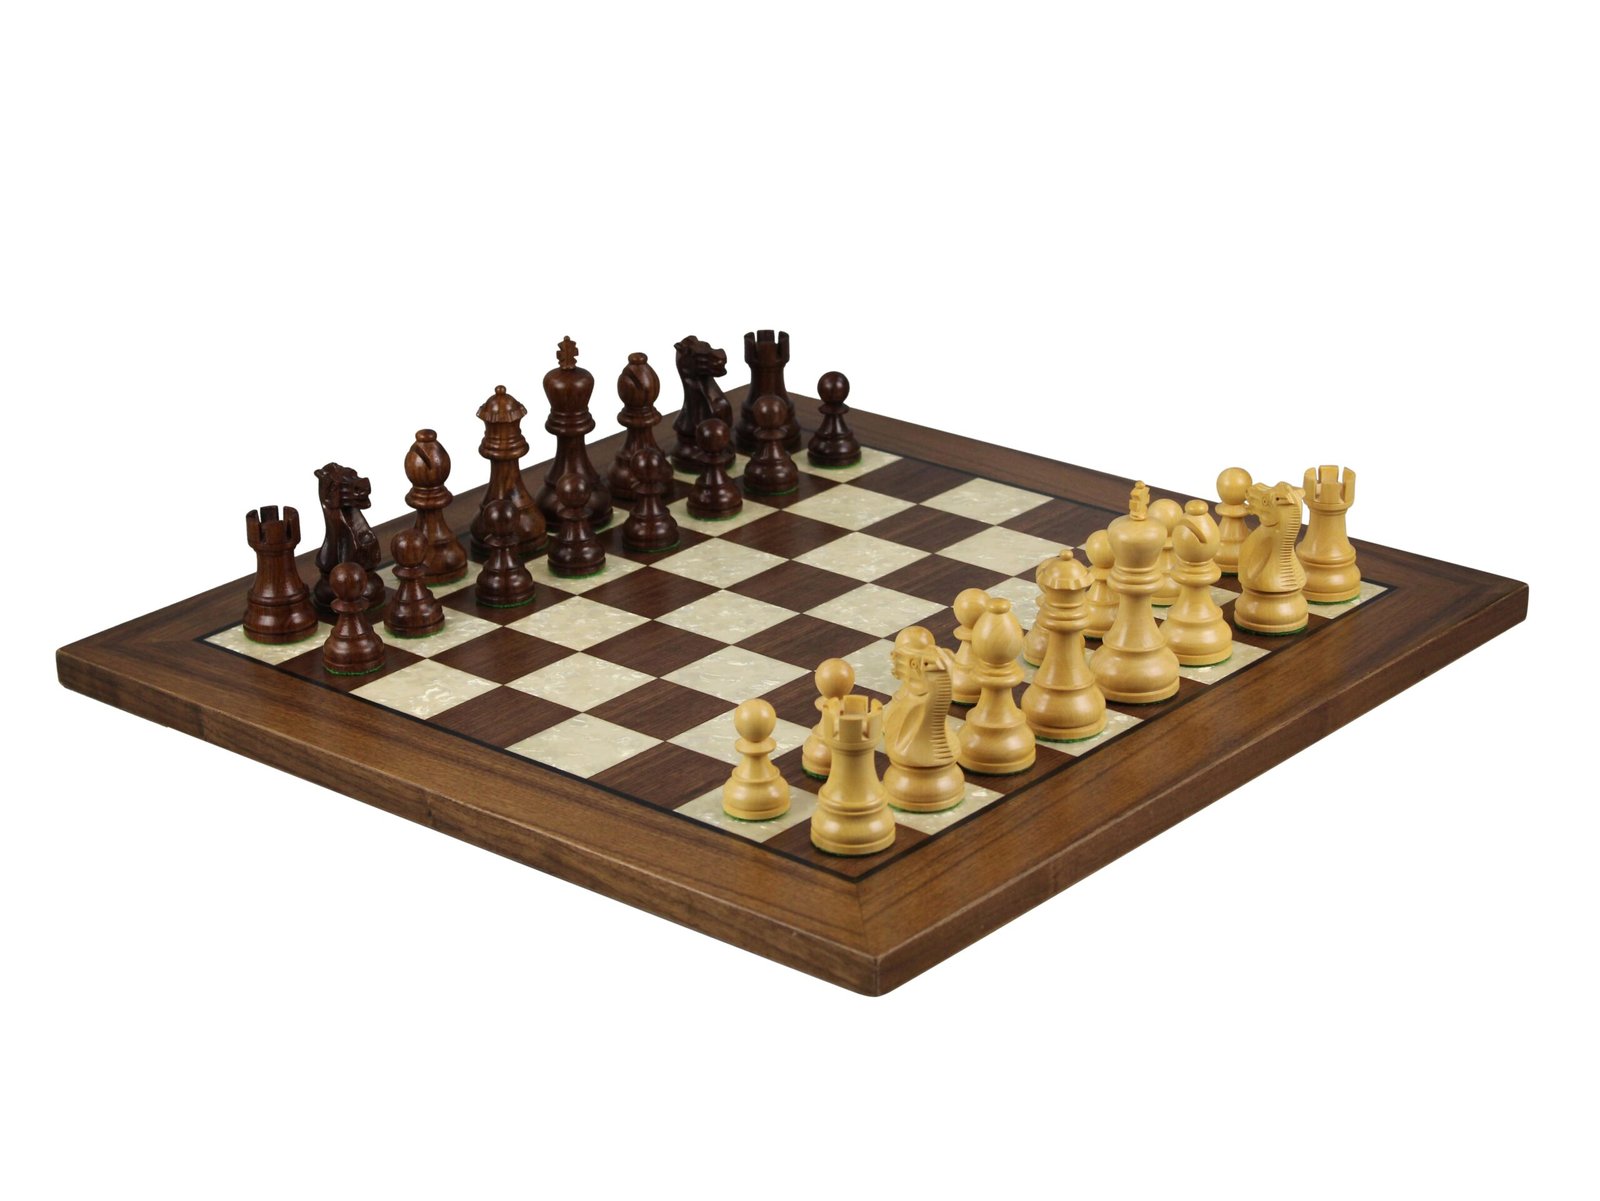 walnut mother of pearl chess board with executive staunton chess pieces